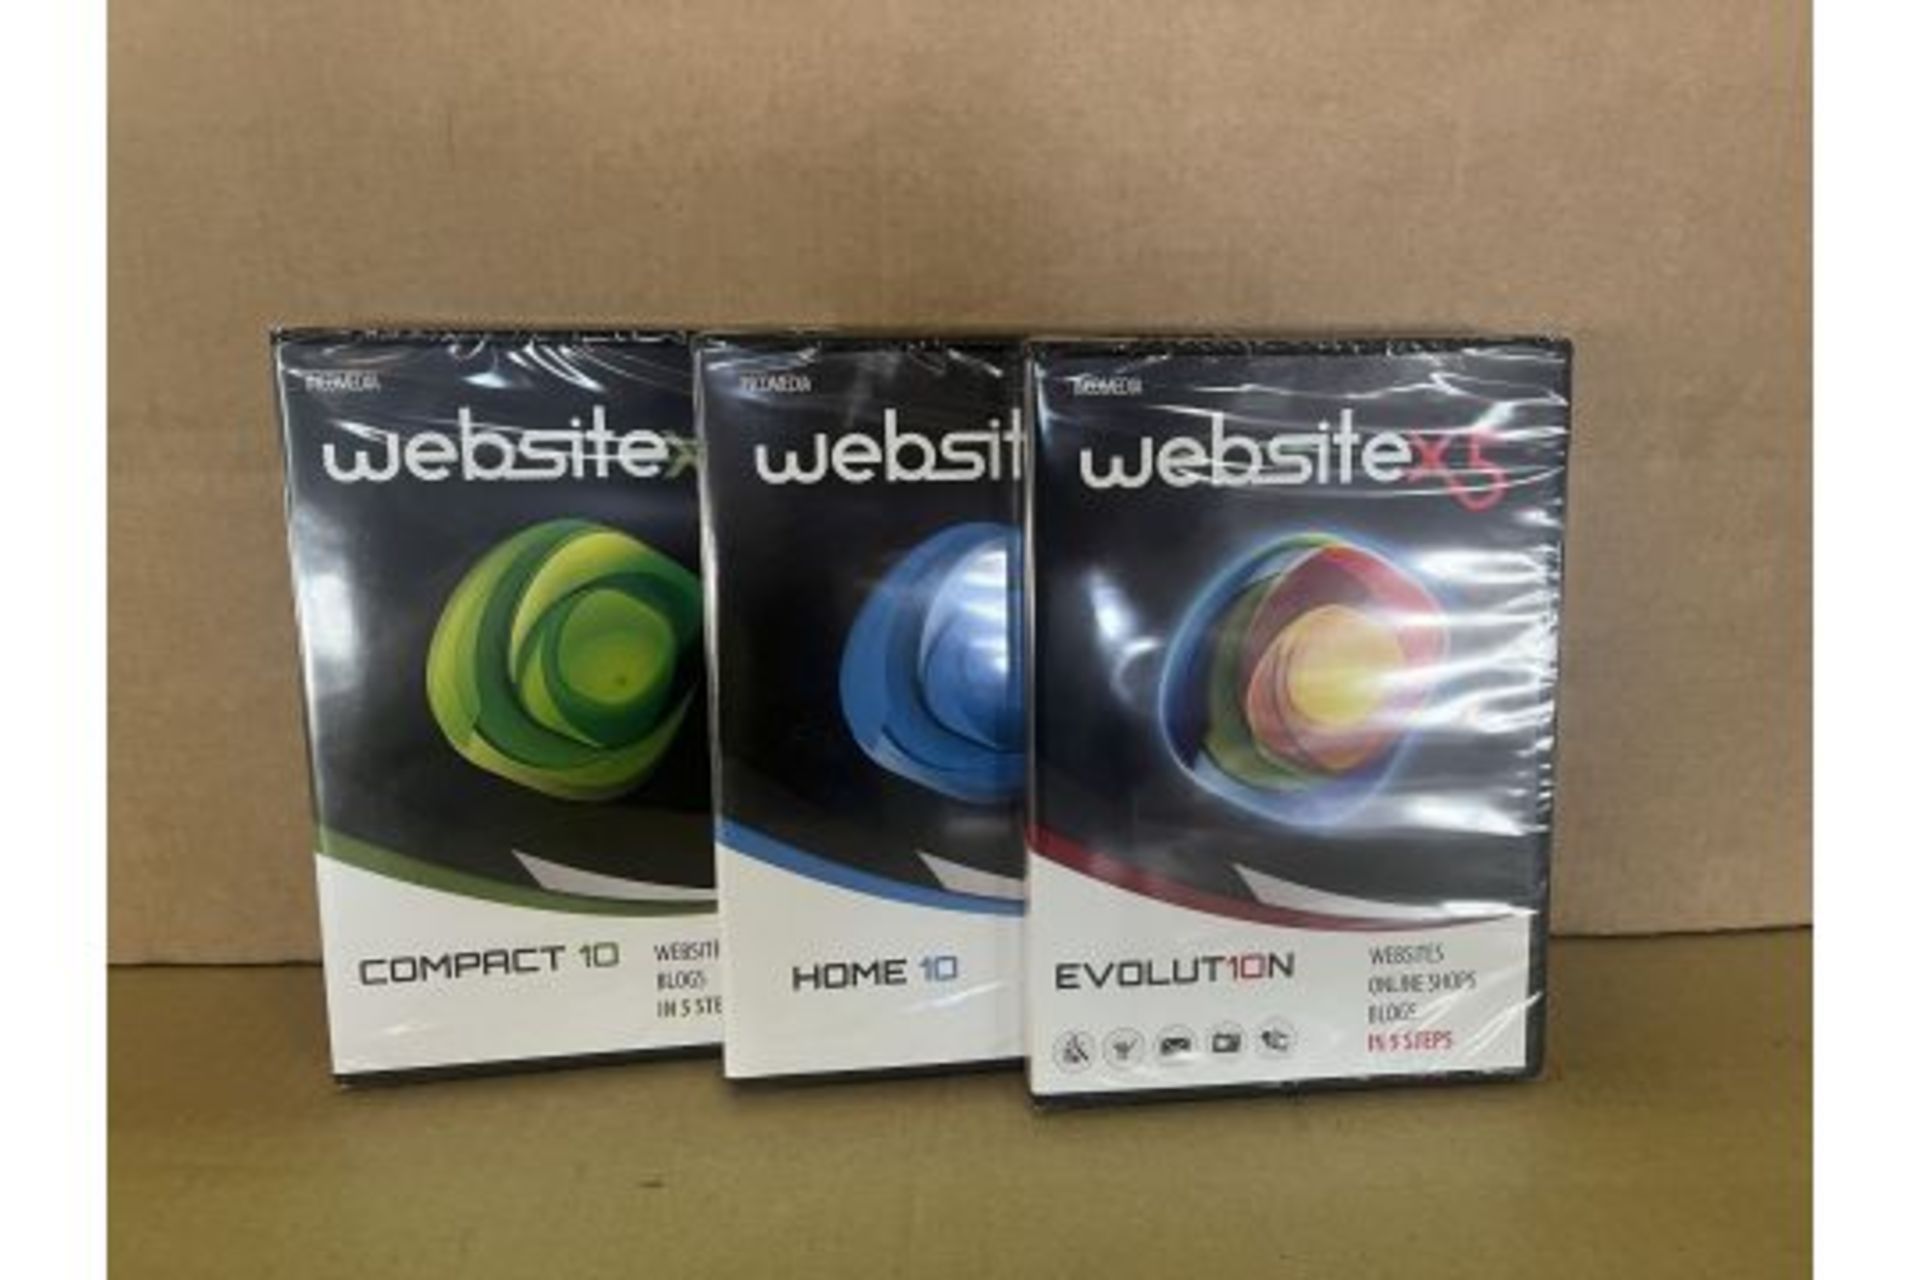 50 X BRAND ENW ASSORTED INCOMEDIA WEBSITEX5 WEBSITE IN 5 STEPS (HOME, EVOLUTION,COMPACT) R15